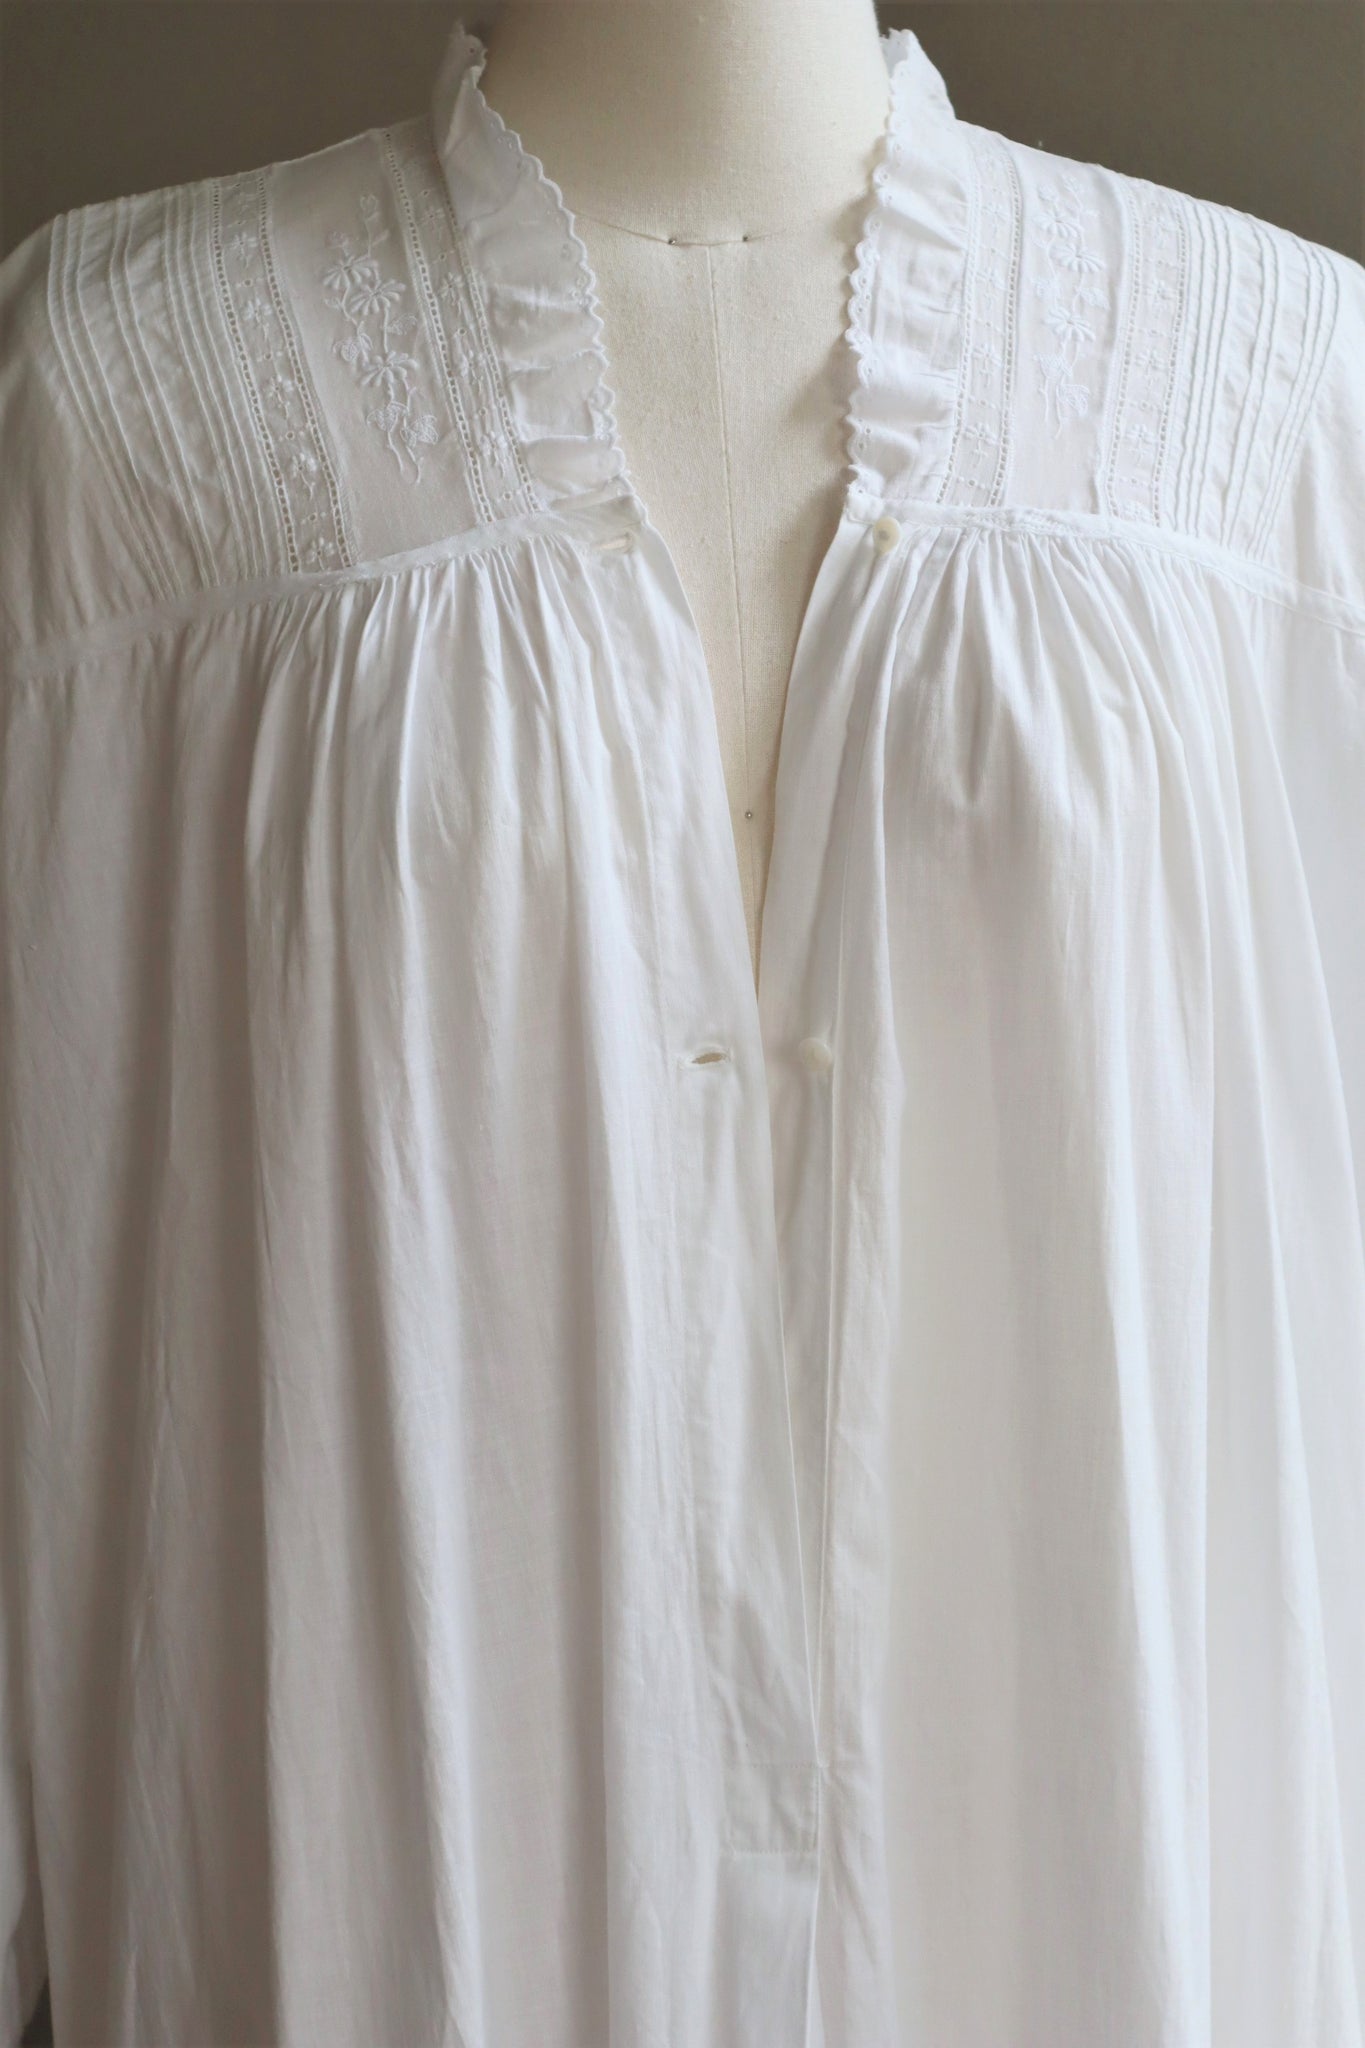 1920s Ruffled Scalloped Lace Floral Embroidery White Cotton Dress